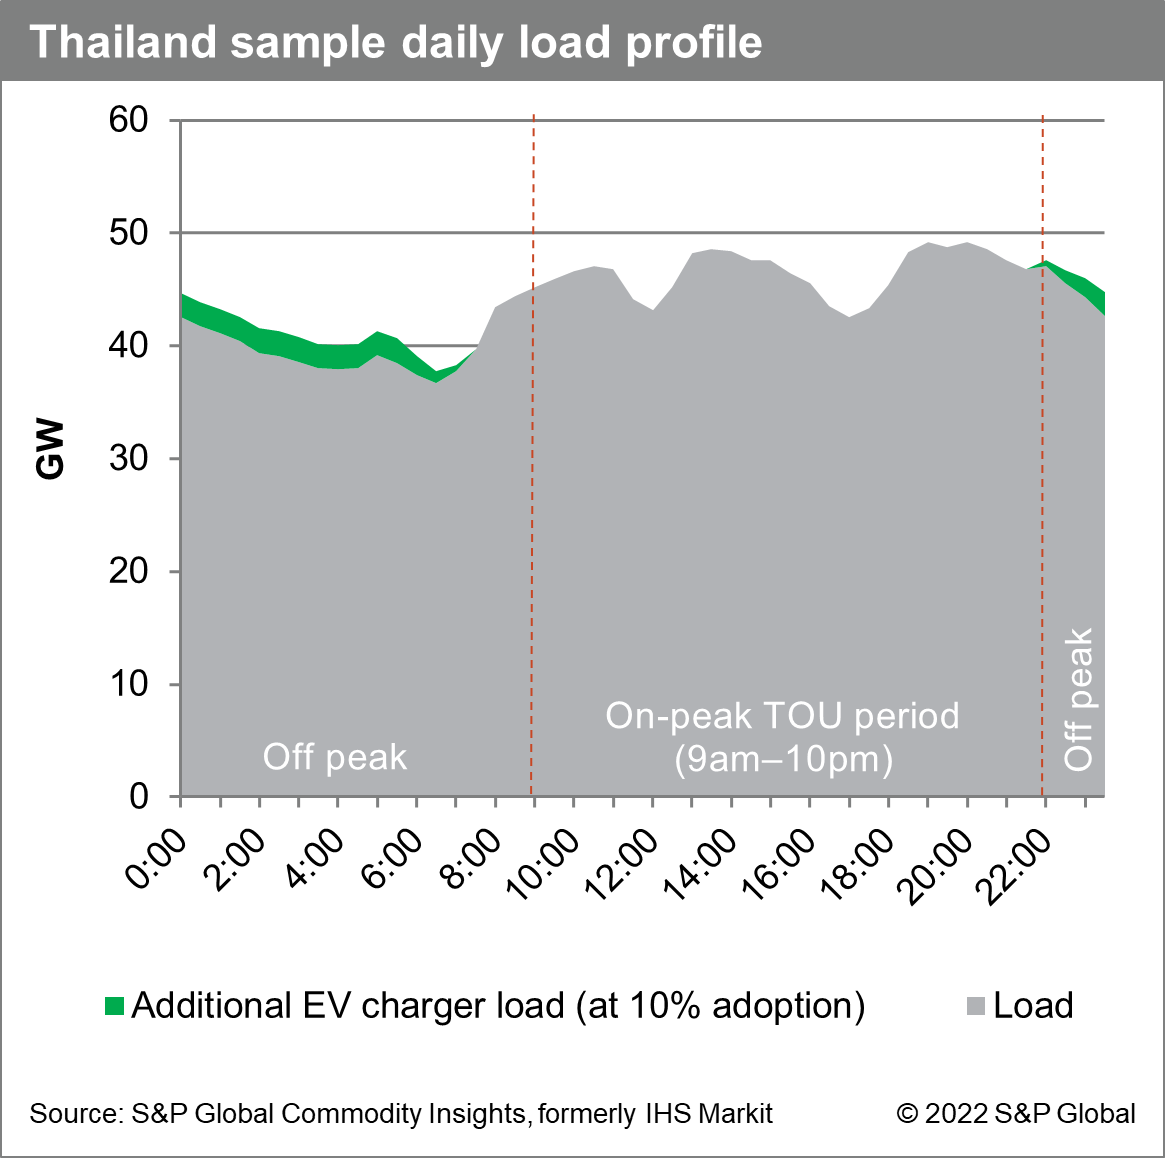 Thailand sample daily load profile